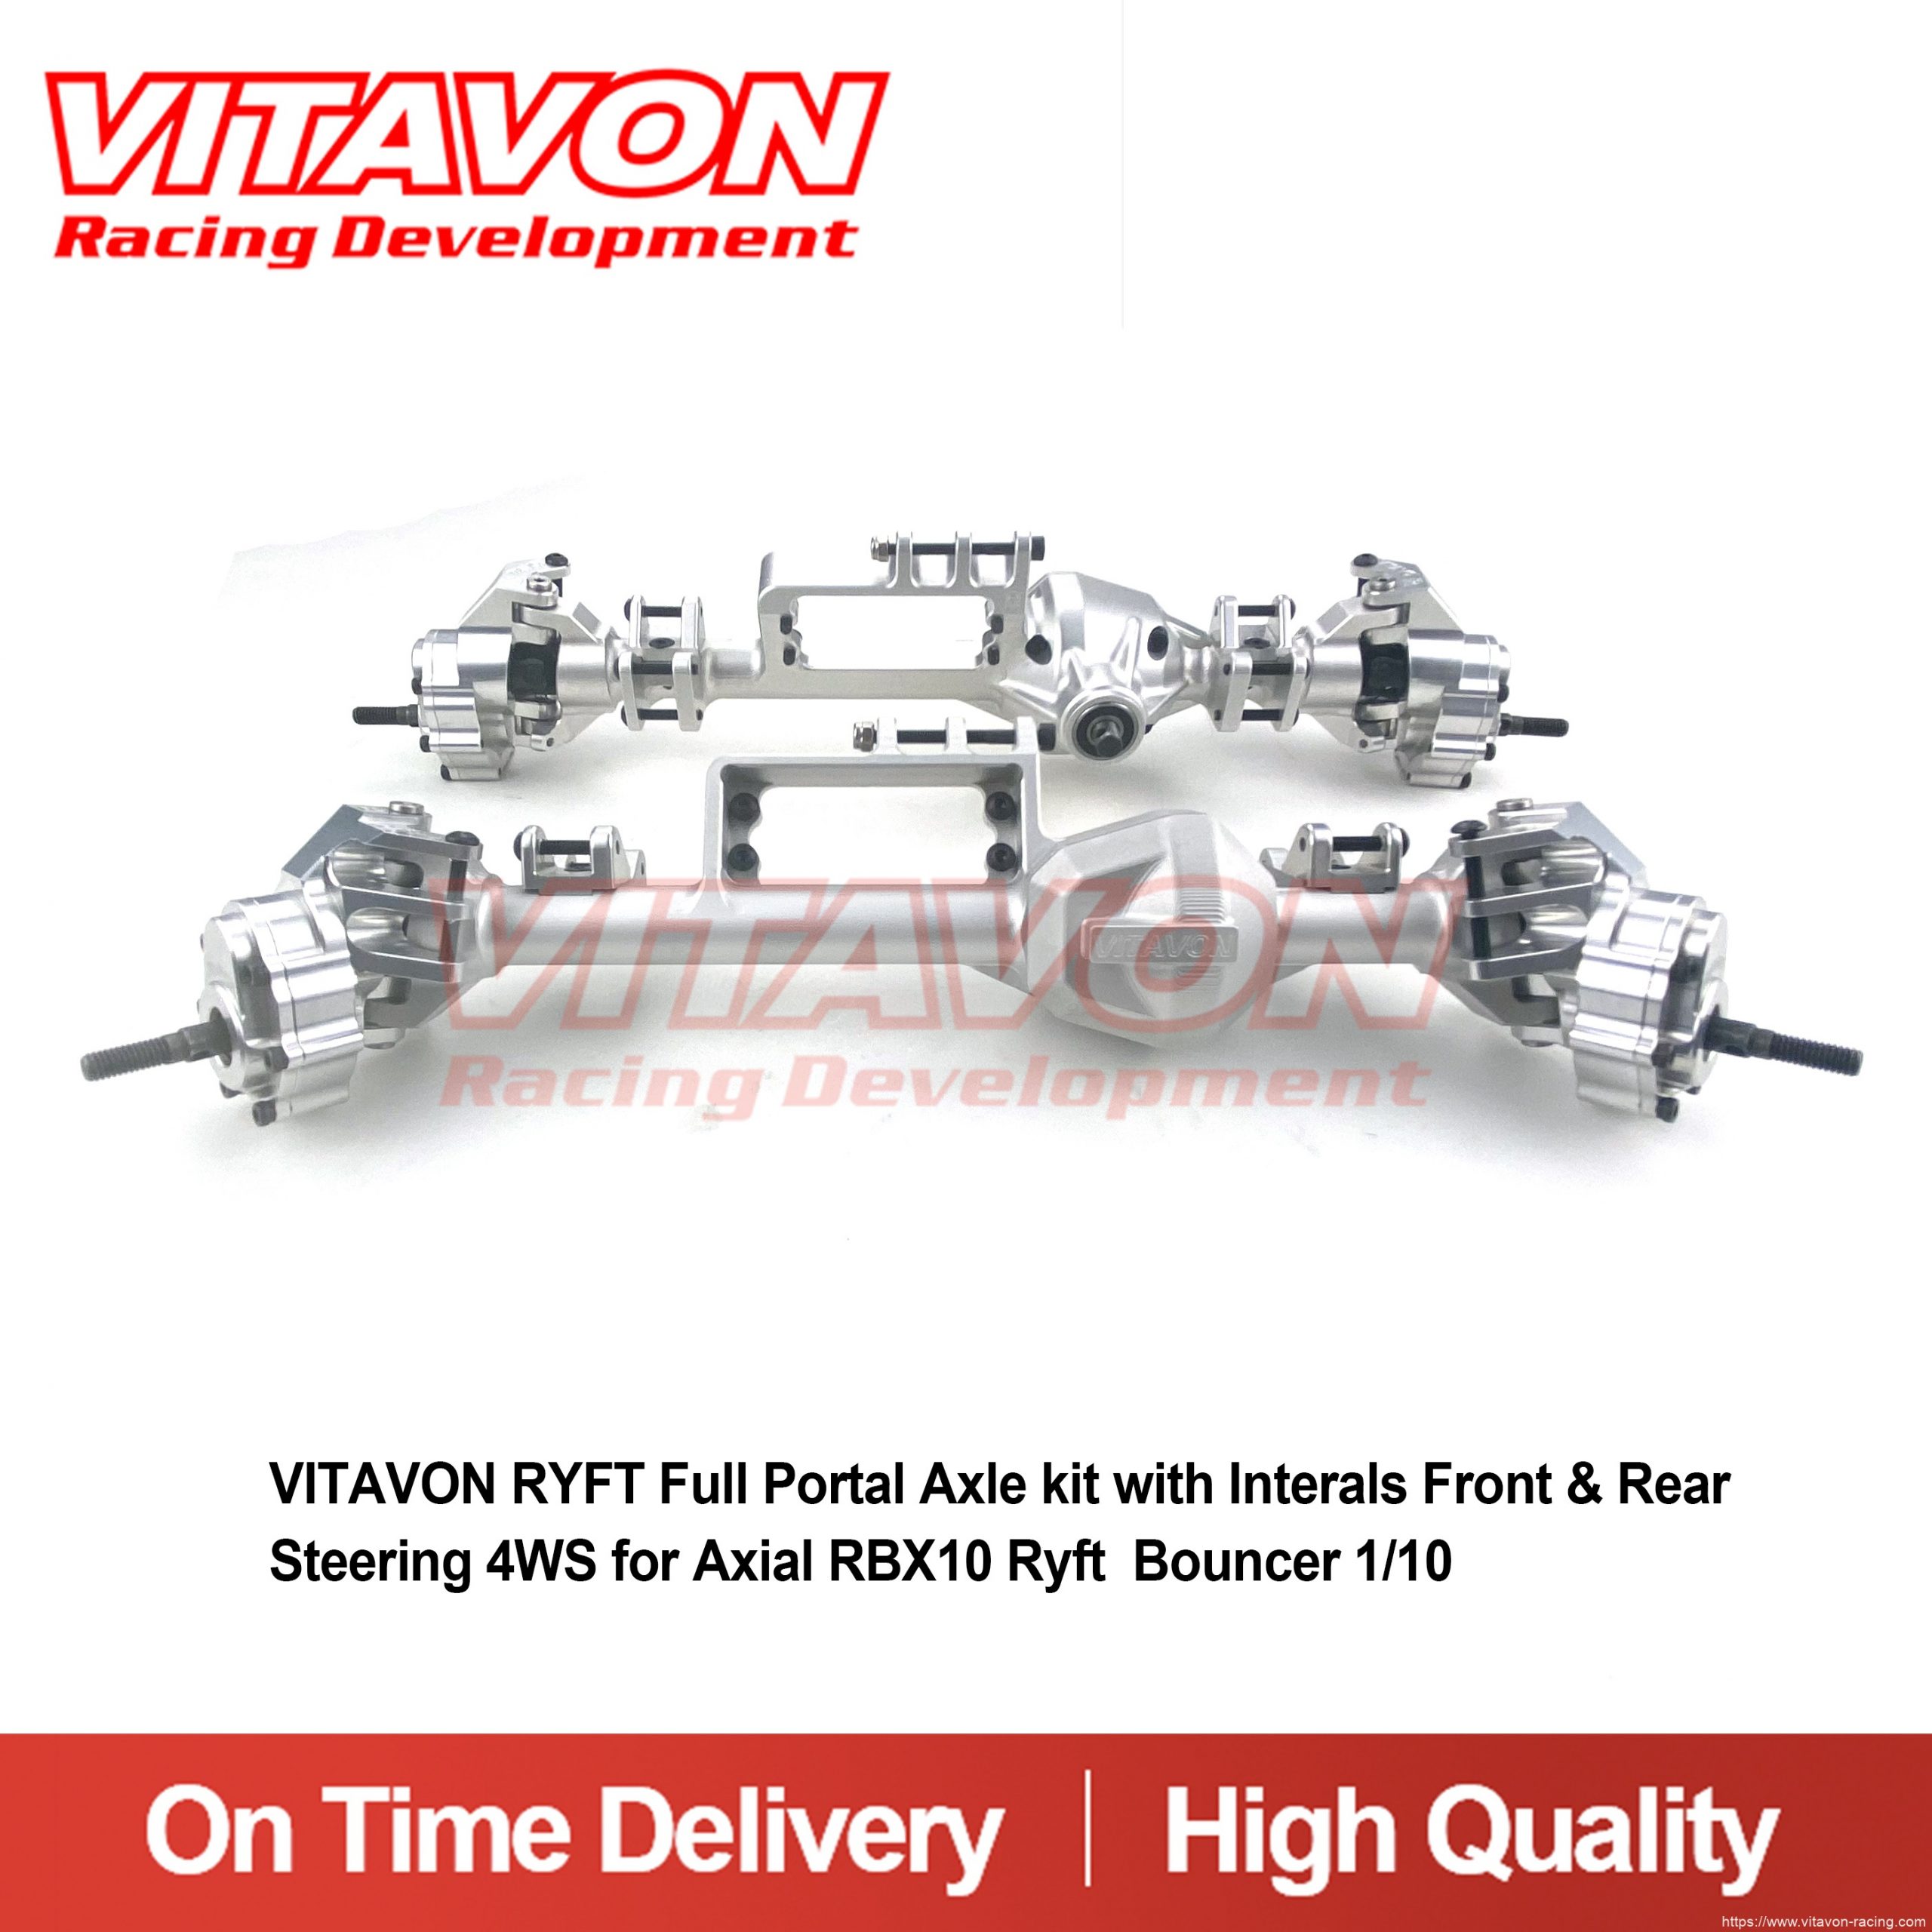 VITAVON RYFT Full Portal Axle kit with Interals Front & Rear Steering 4WS for Axial RBX10 Ryft  Bouncer 1/10